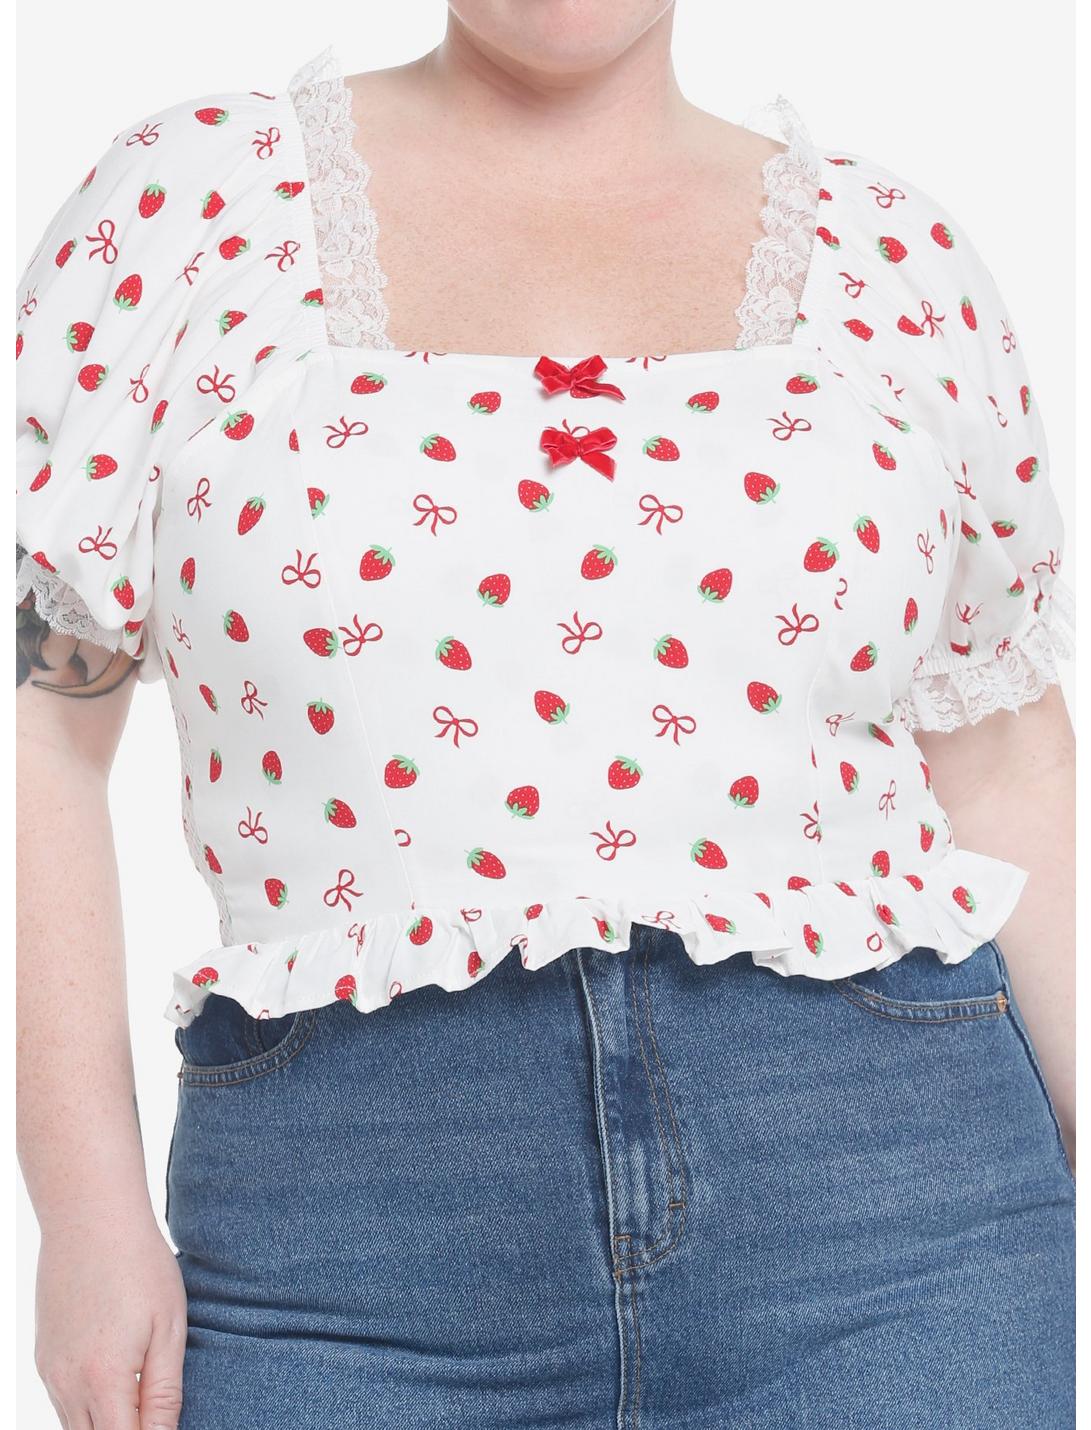 Strawberries & Bows Crop Girls Woven Top Plus Size, WHITE, hi-res